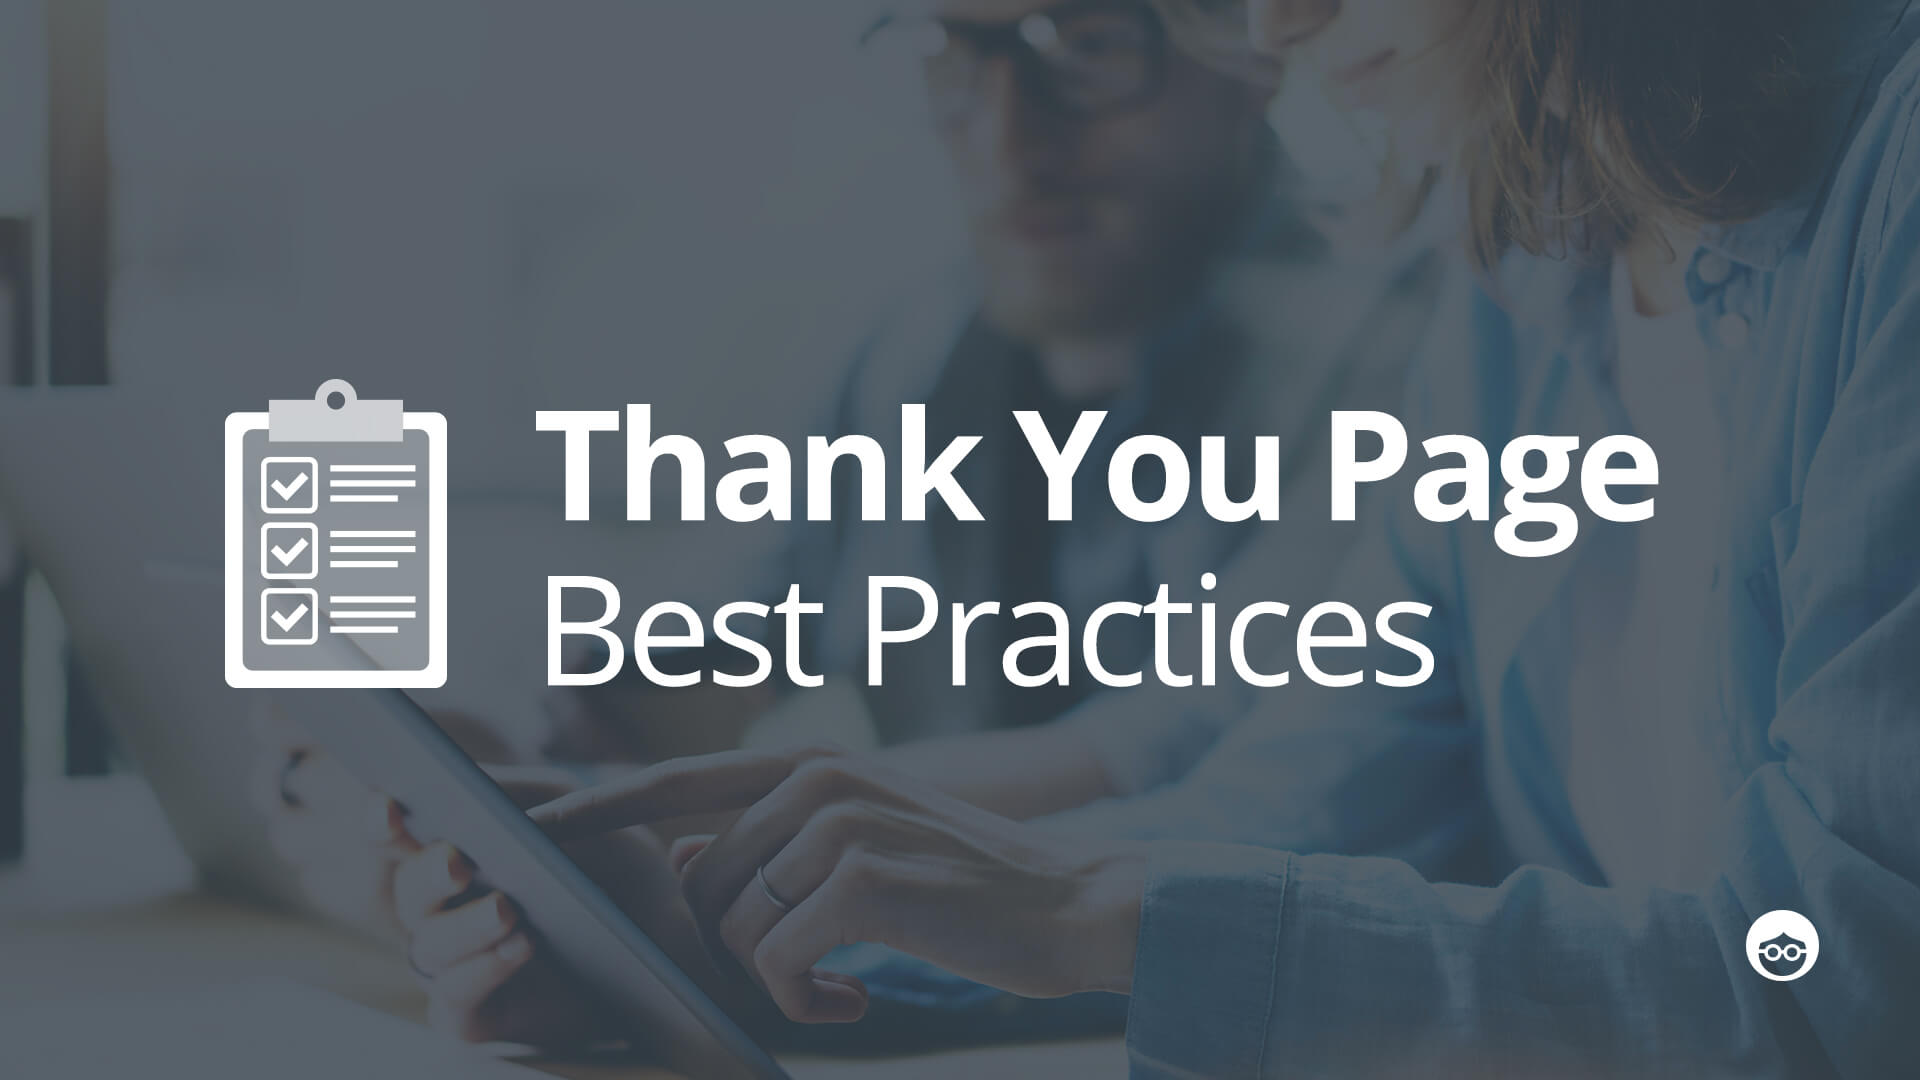 How to Make the Most of Your Thank You Page